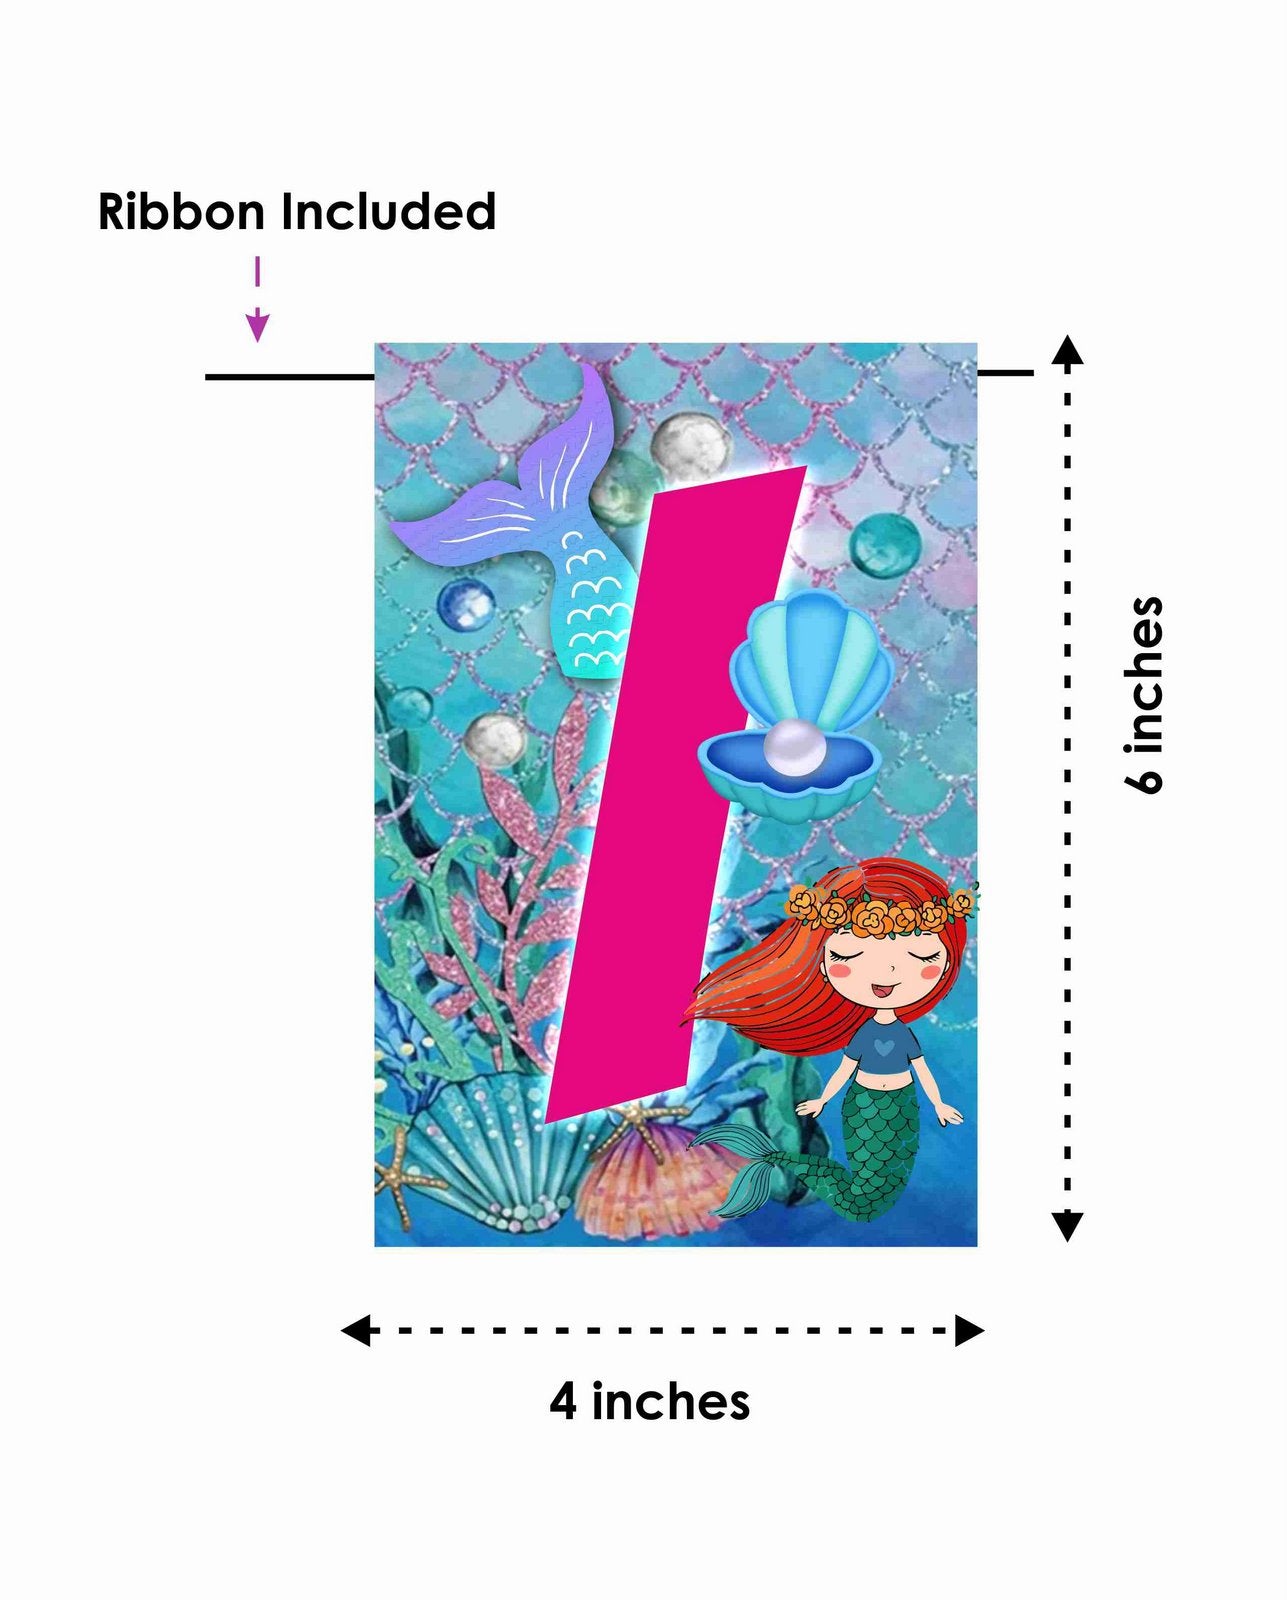 Mermaid Theme I Am Three 3rd Birthday Banner for Photo Shoot Backdrop and Theme Party